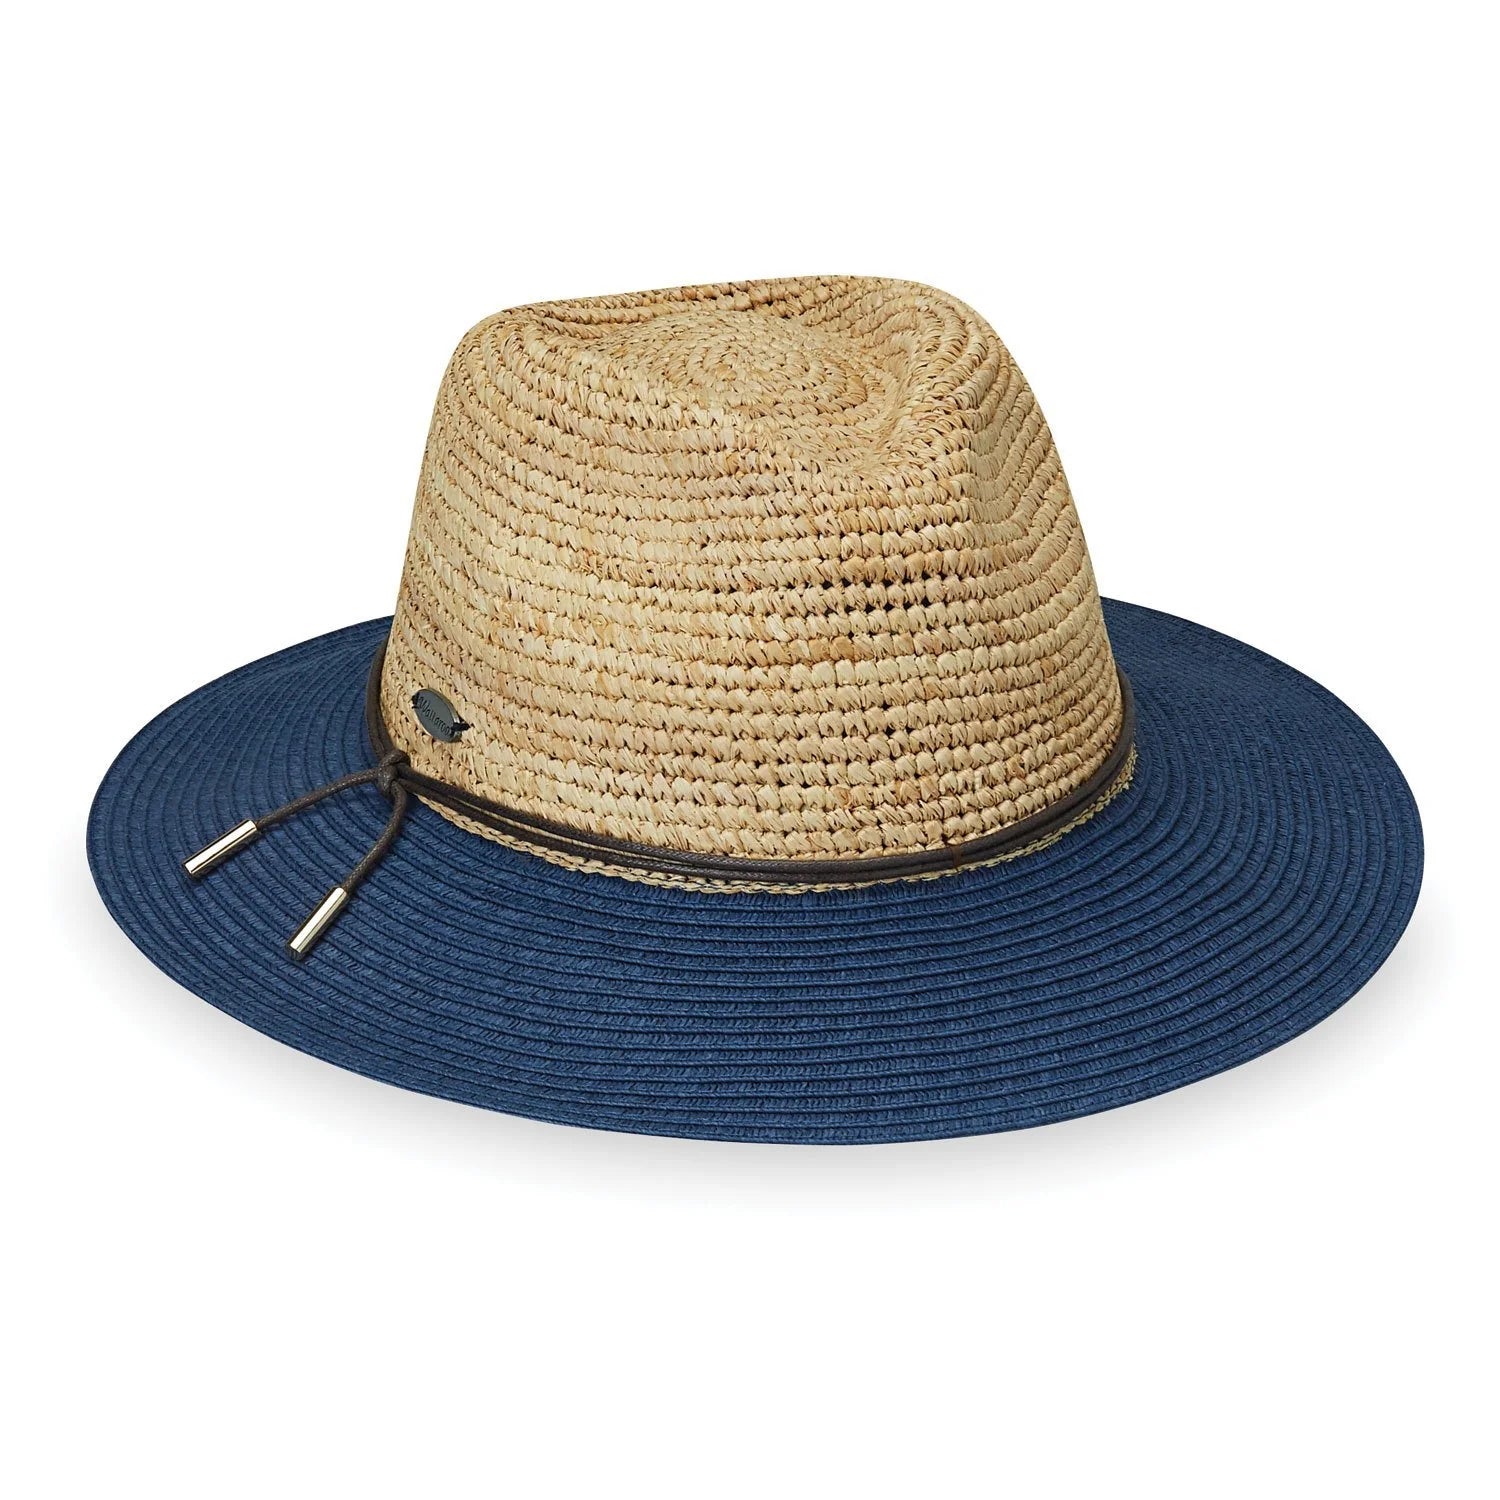 Raw meets refined in a pair of contrasting textures – a lovely pairing of natural fiber with the structured lines of paper braid. The Laguna hat can be worn for walks on the beach or attending an art festival. This raffia beach hat features a faux leather cord with gold metal tips for a modern feel.&nbsp;